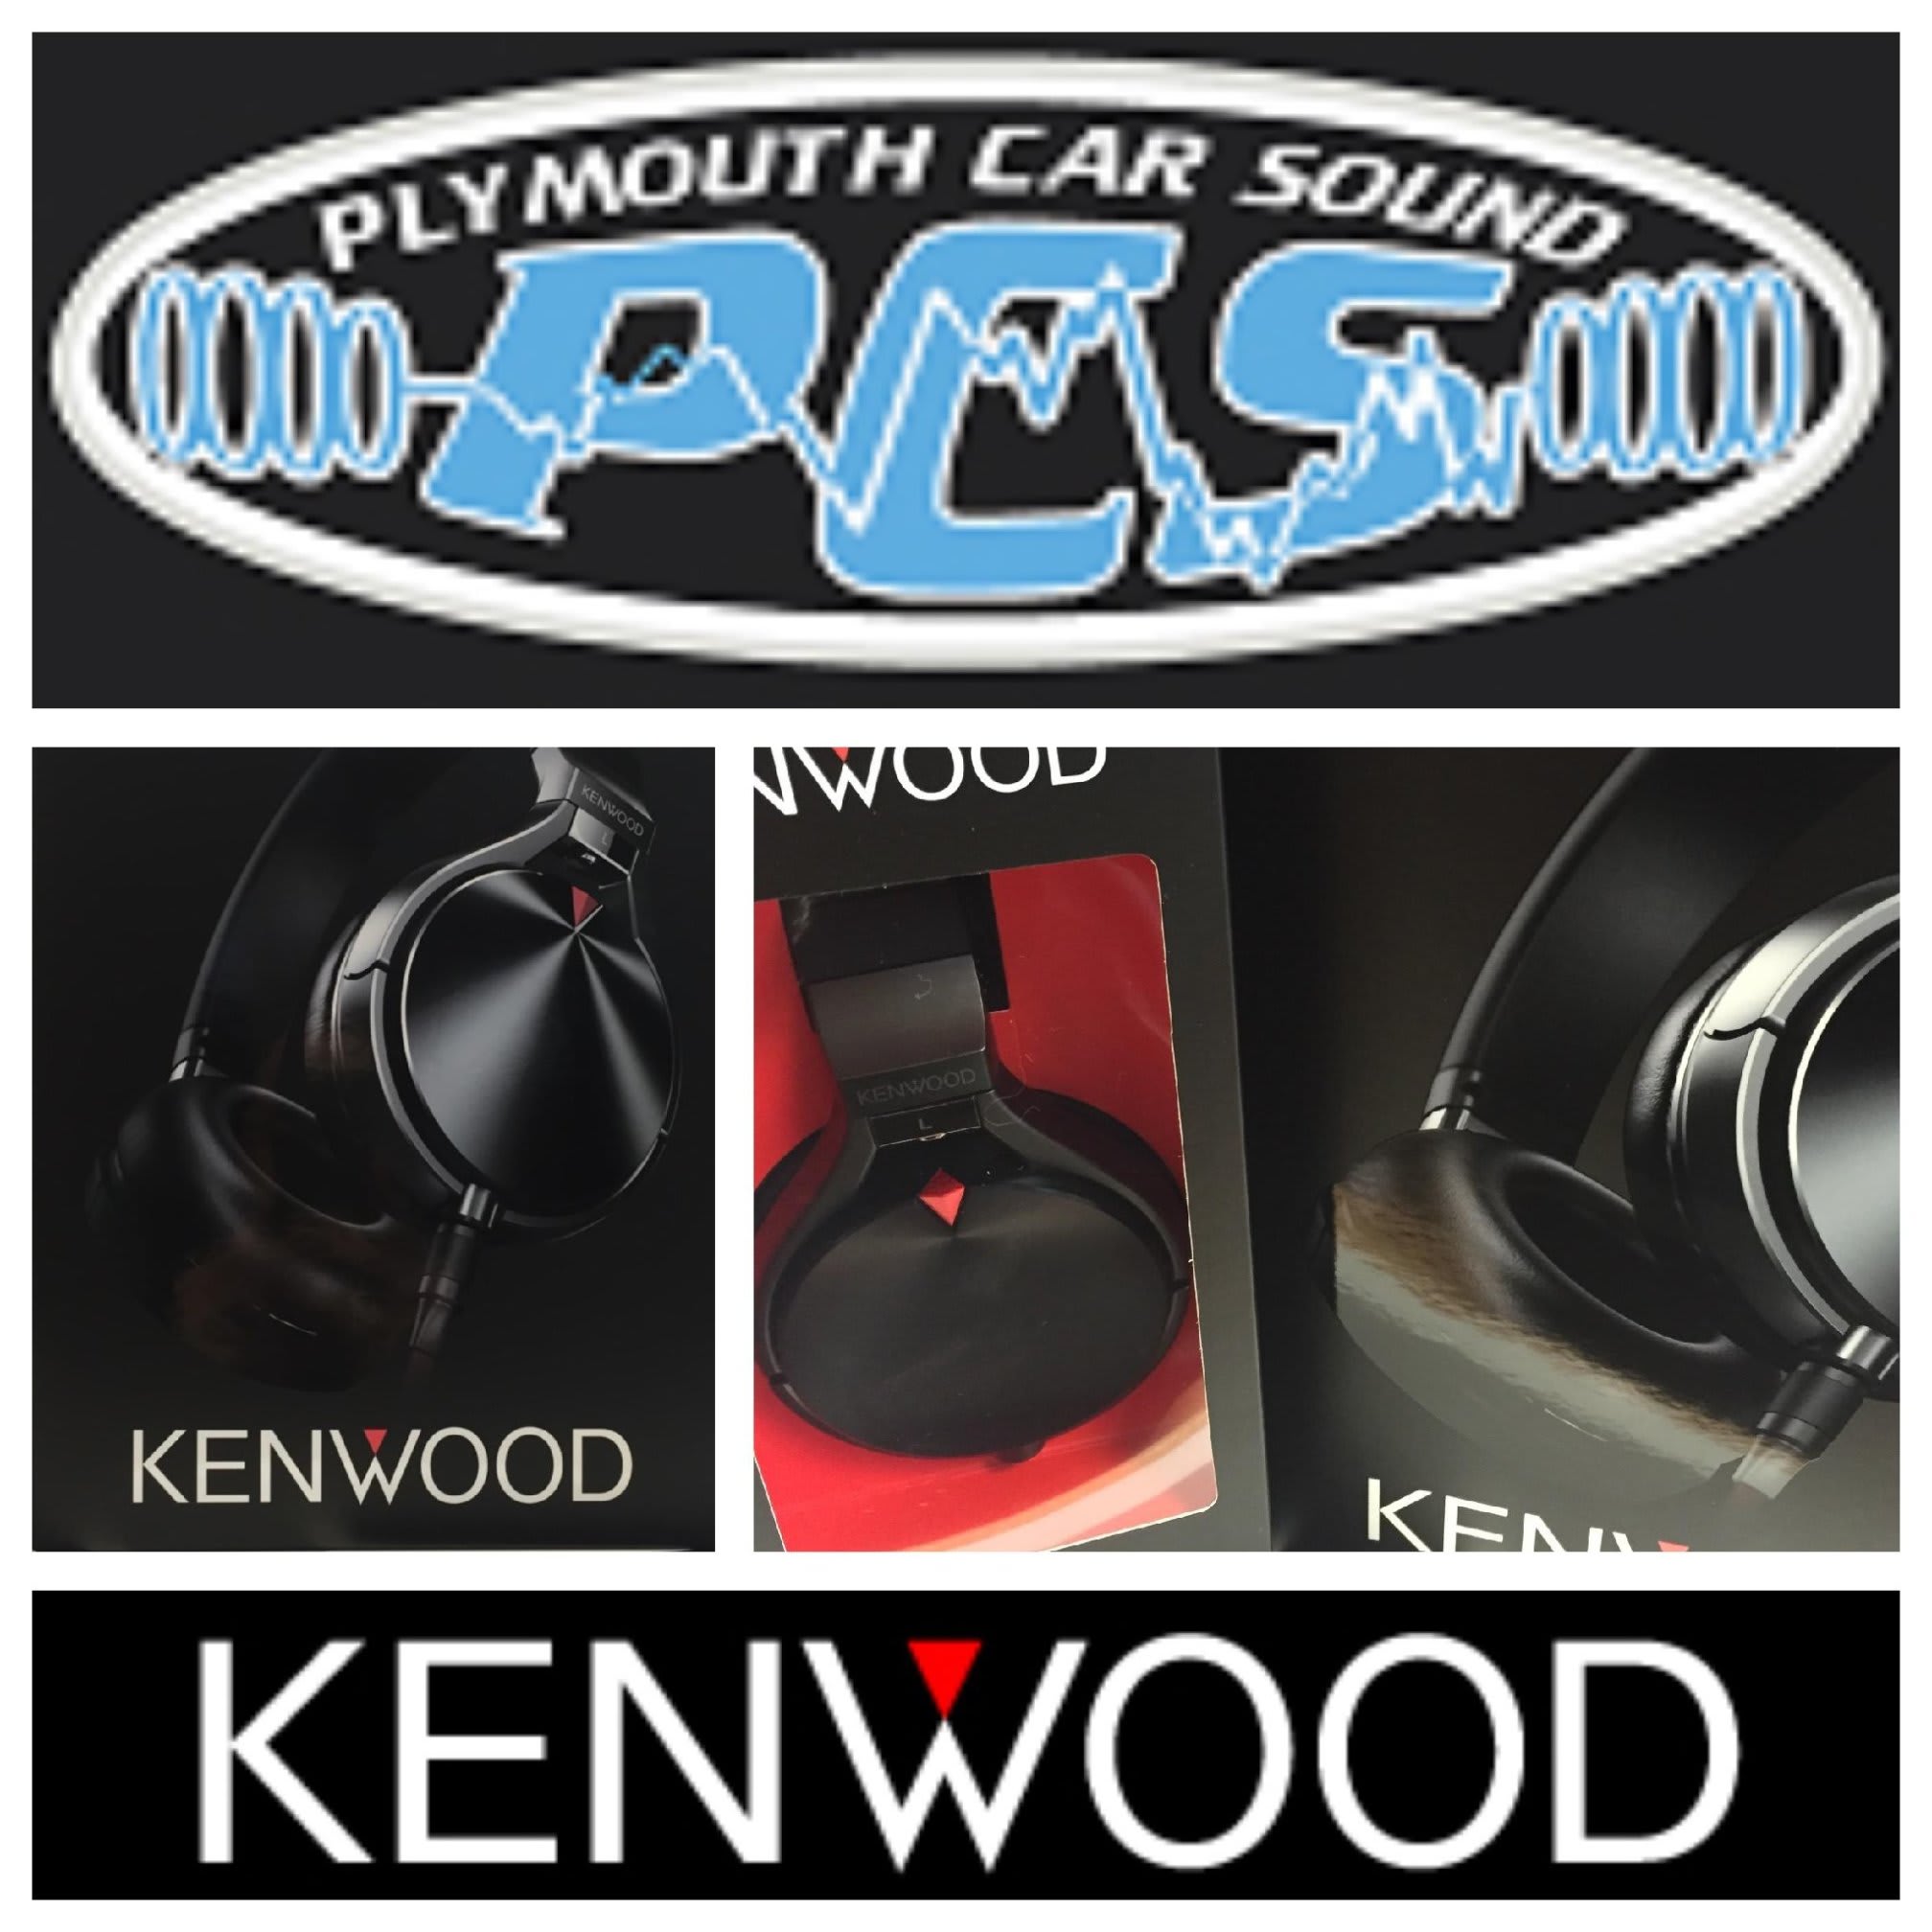 Plymouth Car Sound Plymouth 01752 221989